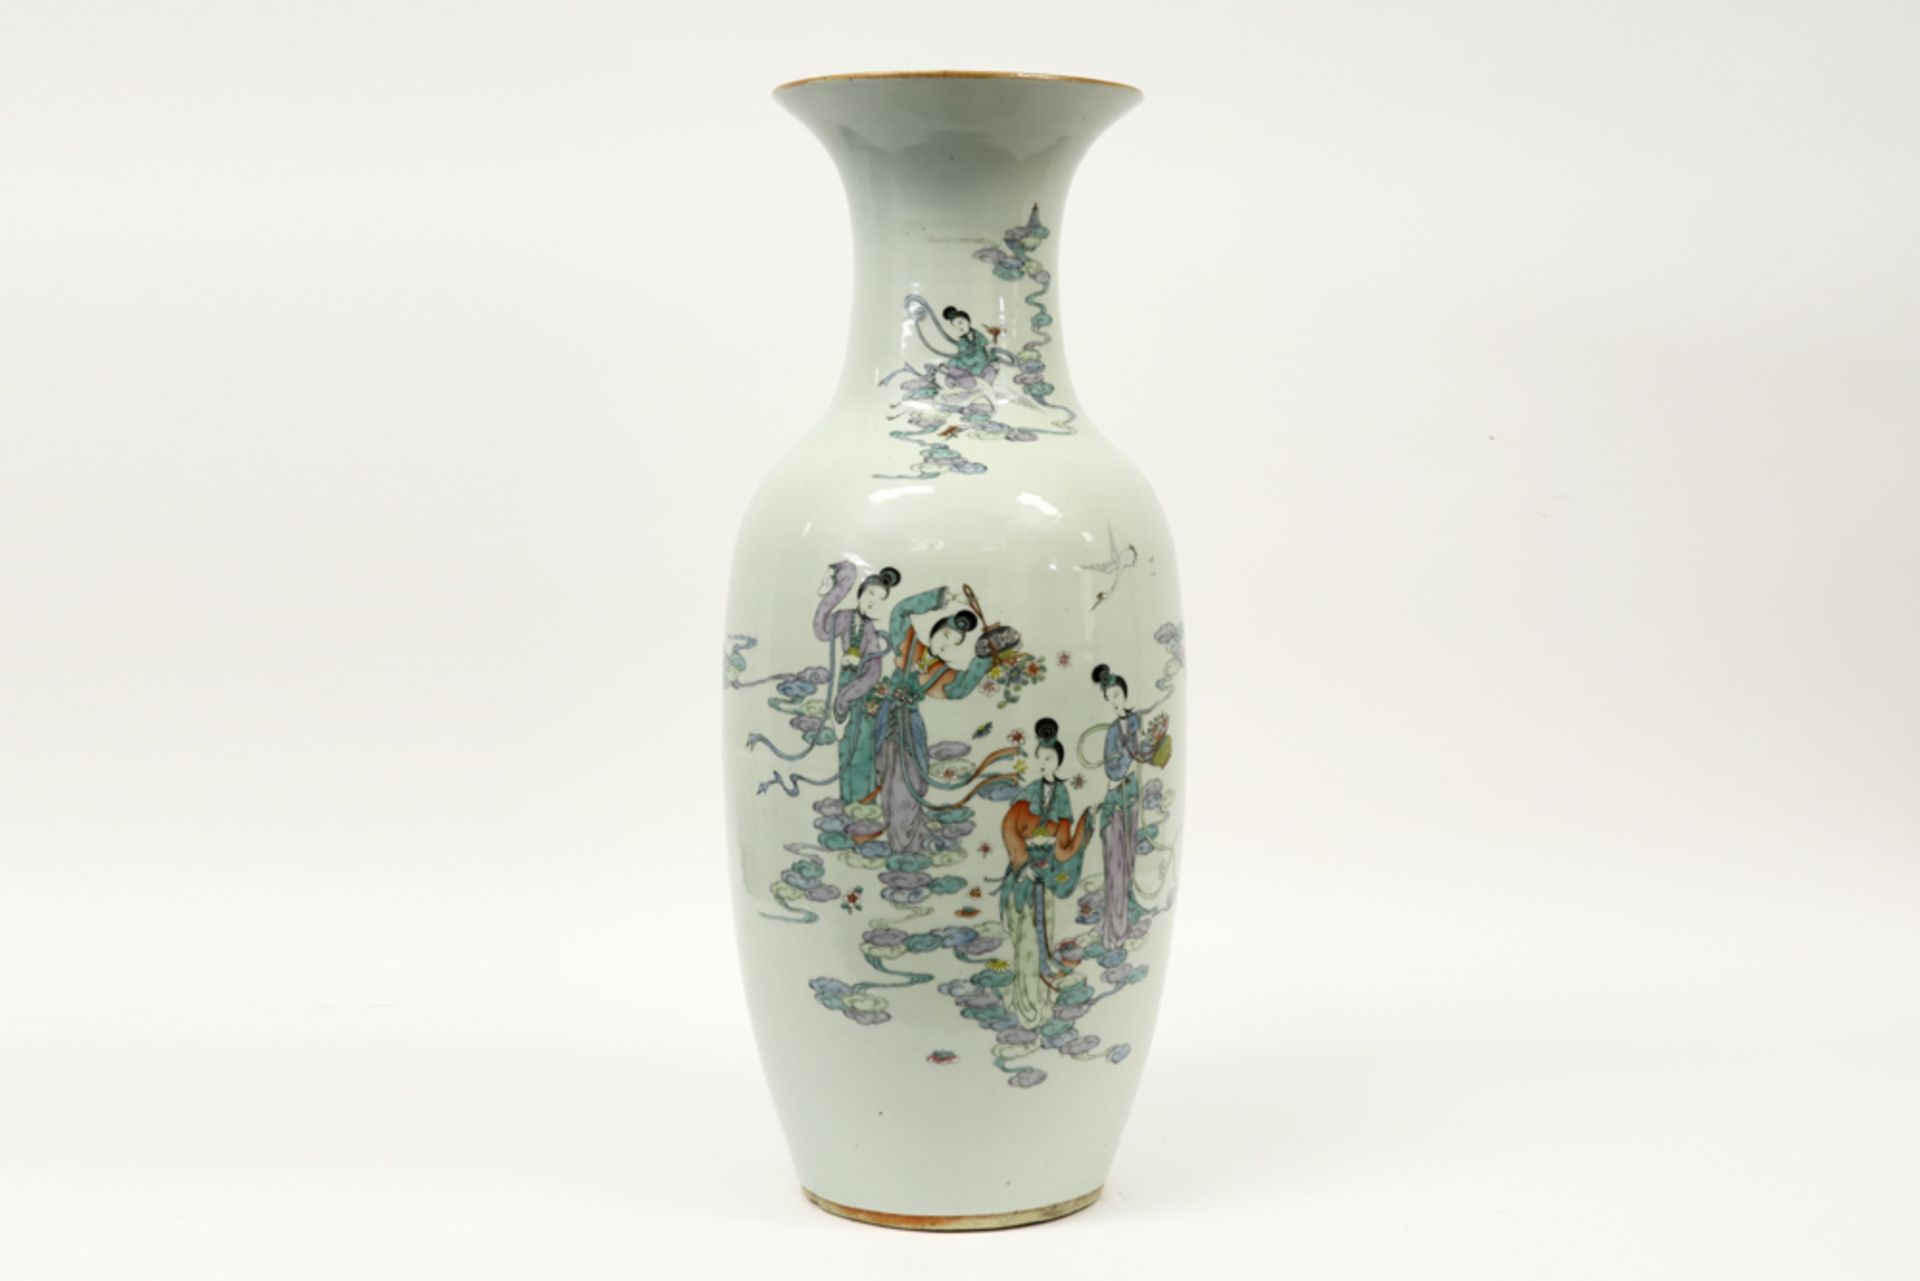 Chinese Republic period vase in porcelain with a polychrome decor with 'Elizas' || Chinese vaas